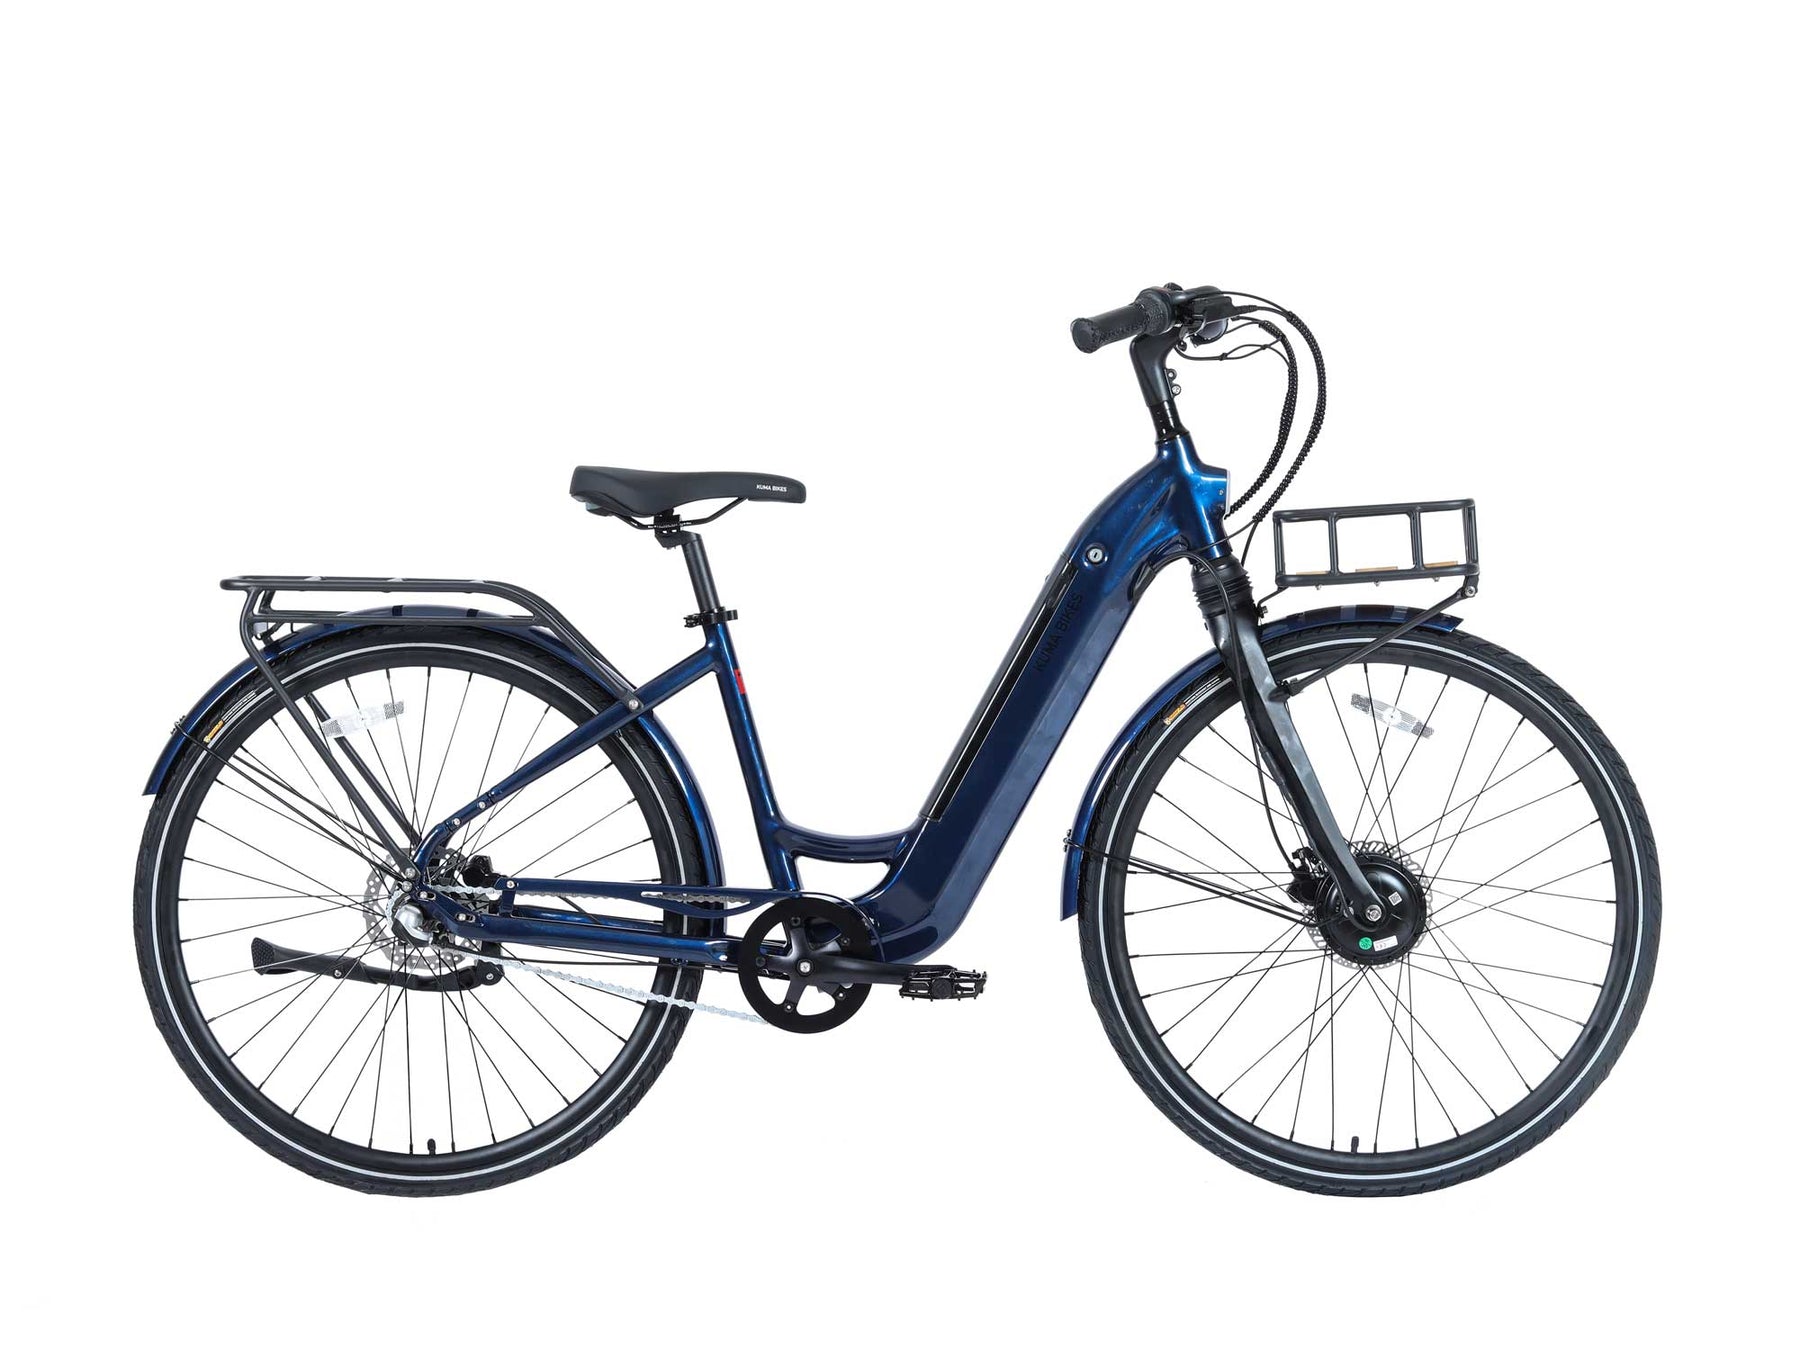 A product image of the Kuma S2 electric bike showing the right side of the bike against a white background. The frame colour is Navy Metallic.